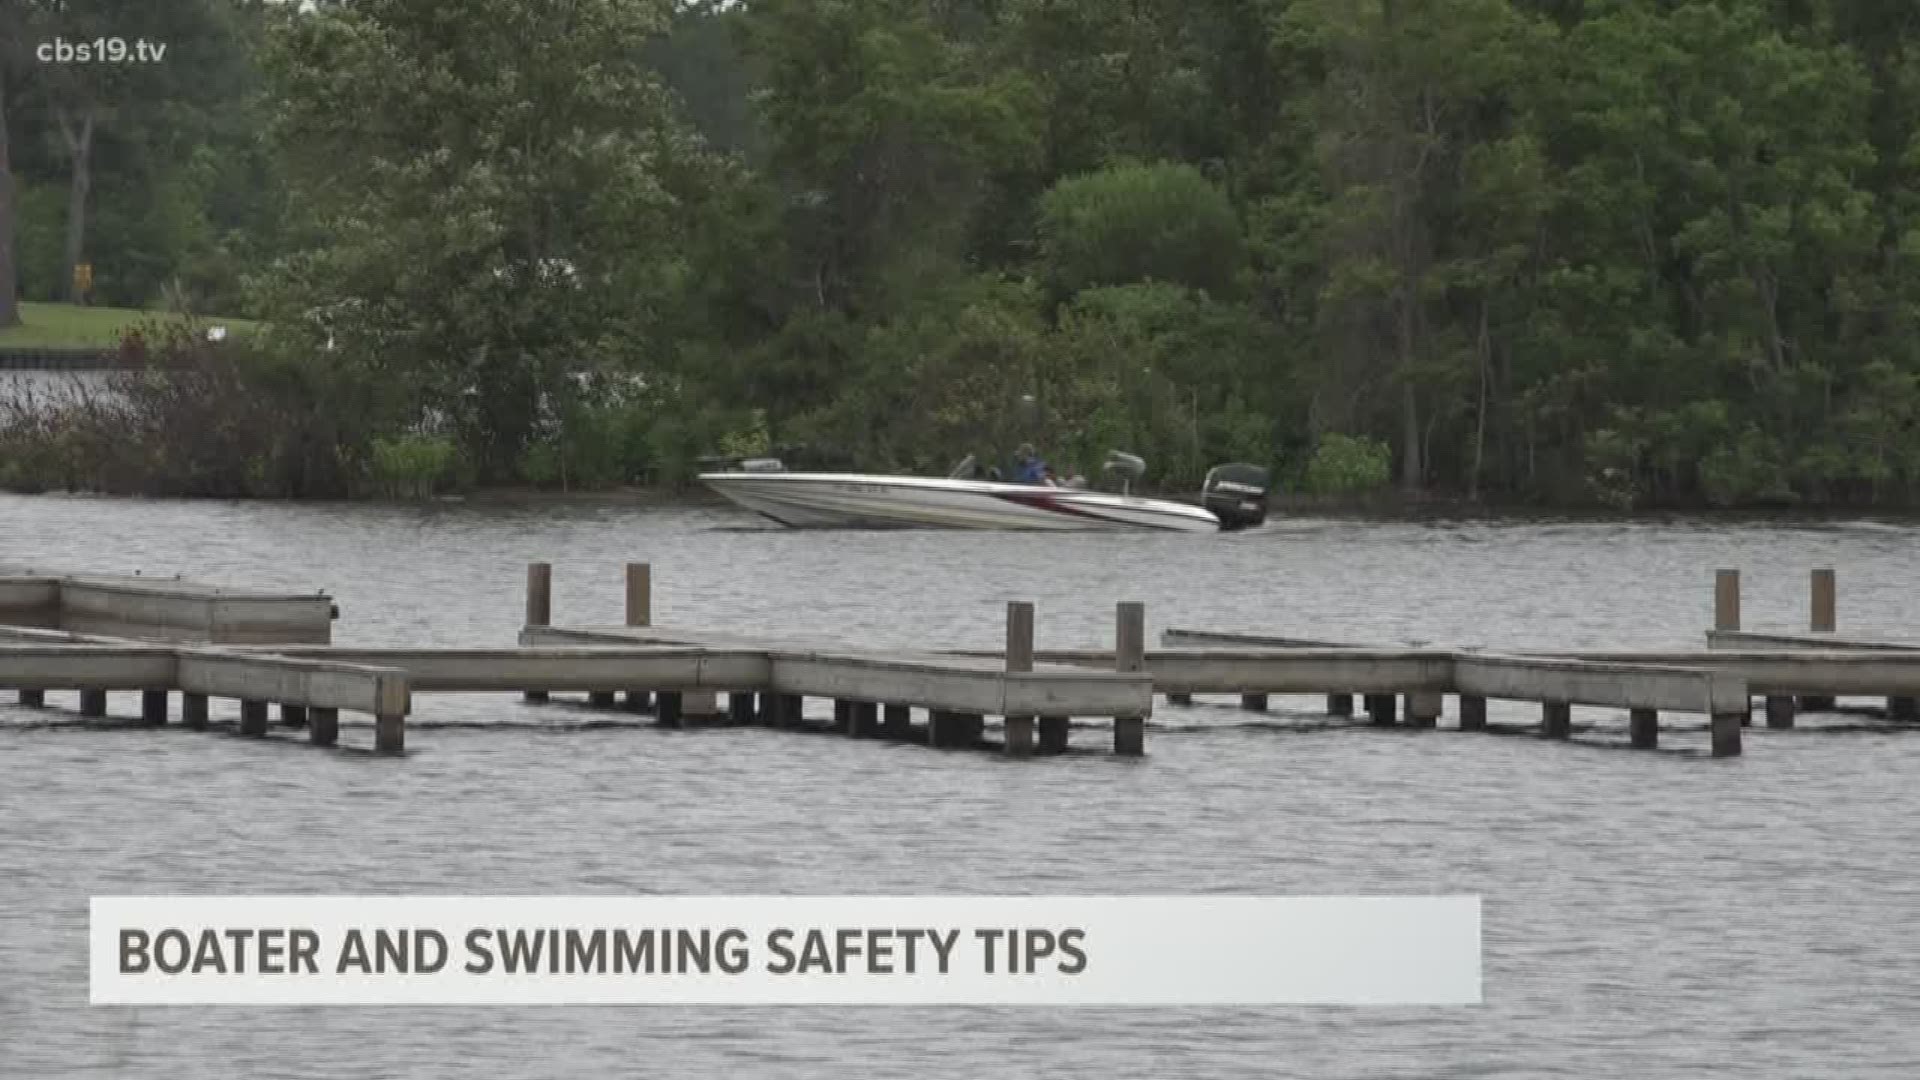 Many East Texans will head to the lake to keep cool. However, there are things you need to keep in mind to stay safe during the summer.